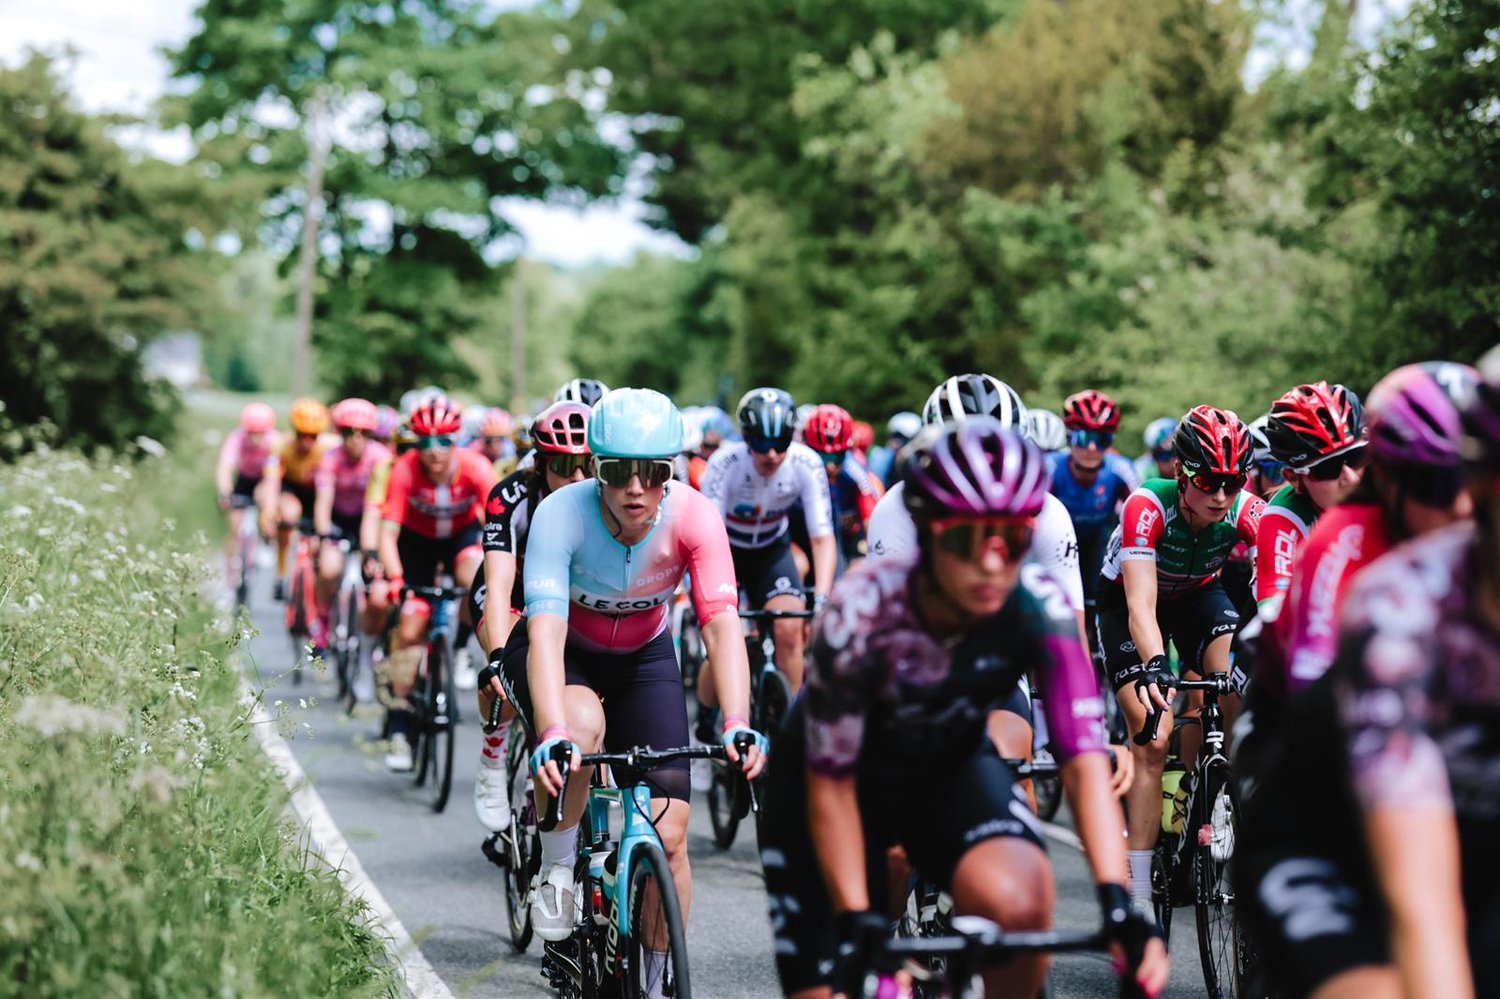 British block continues with Women’s Tour